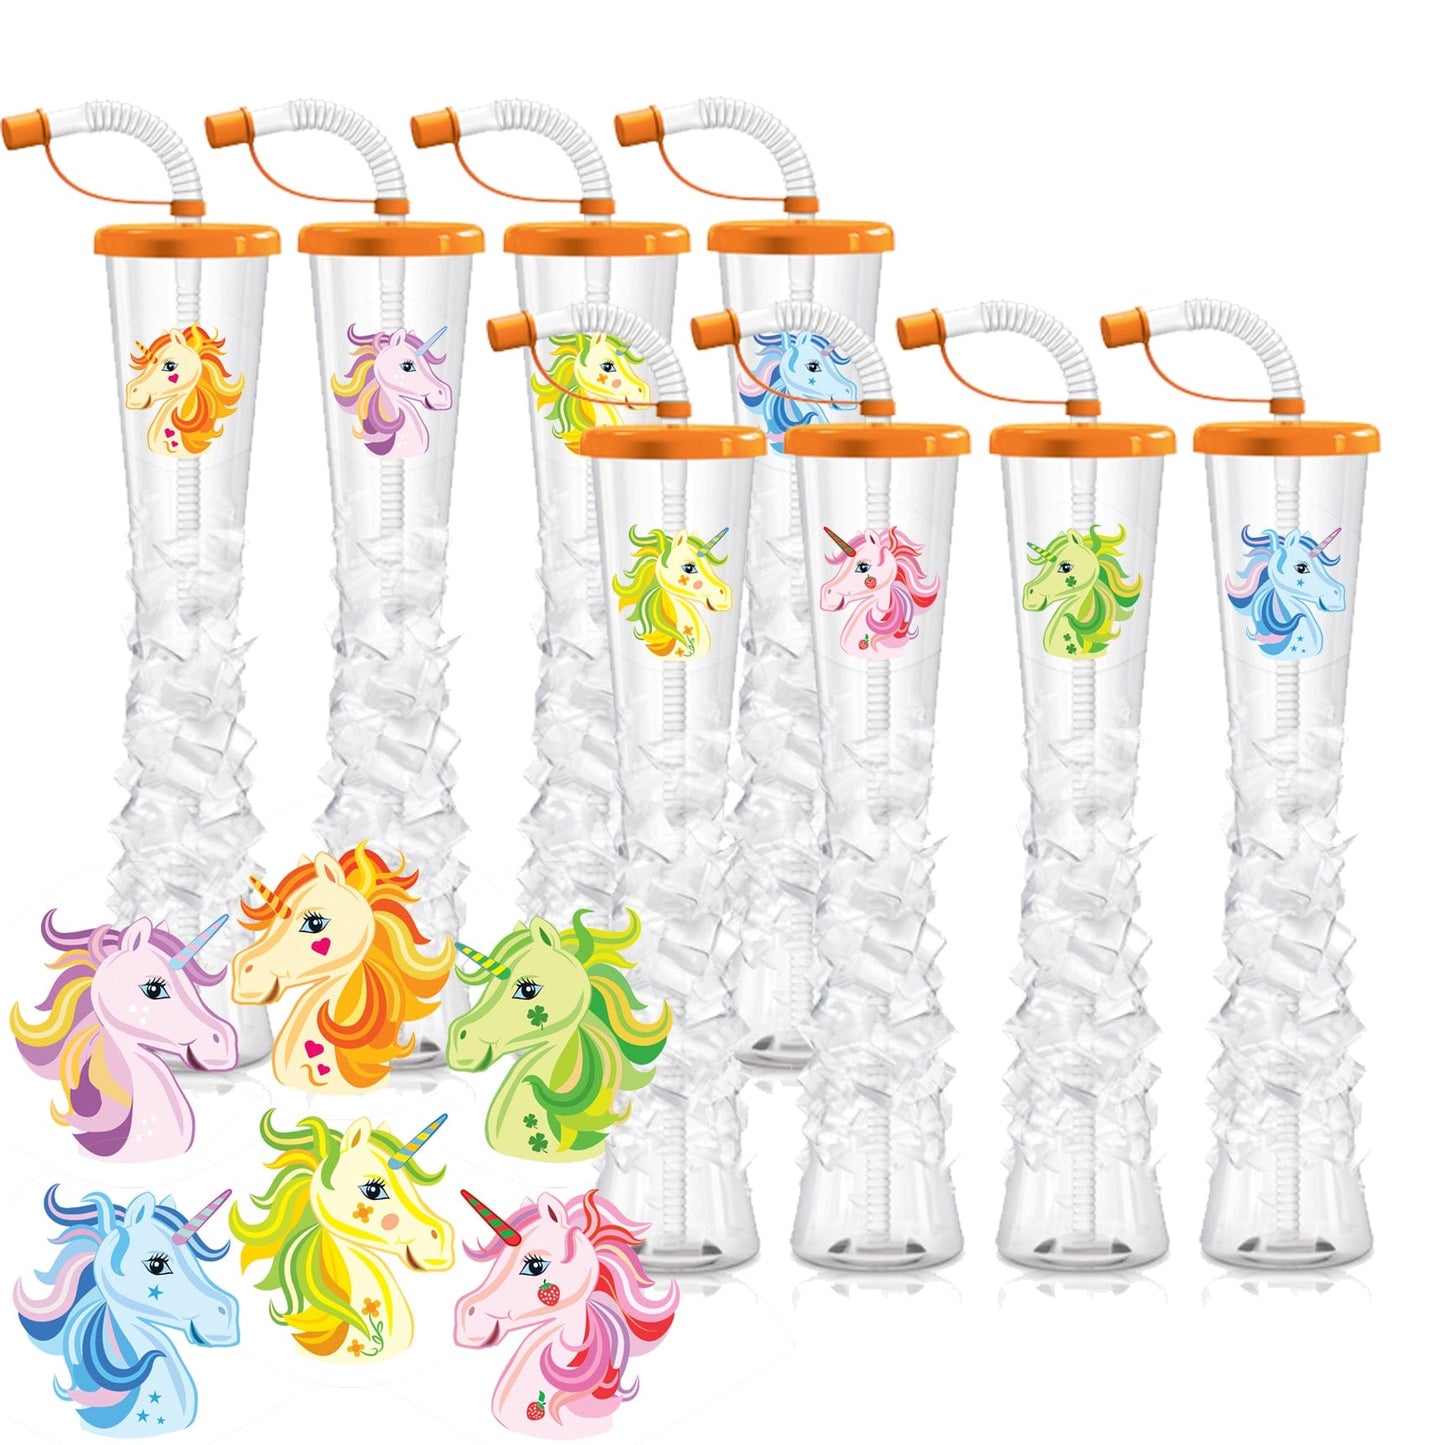 Sweet World USA Yard Cups Orange with Unicorn Unicorn Ice Yard Cups (54 Cups) - for Margaritas and Frozen Drinks, Kids Parties - 17oz. (500ml) cups with lids and straws